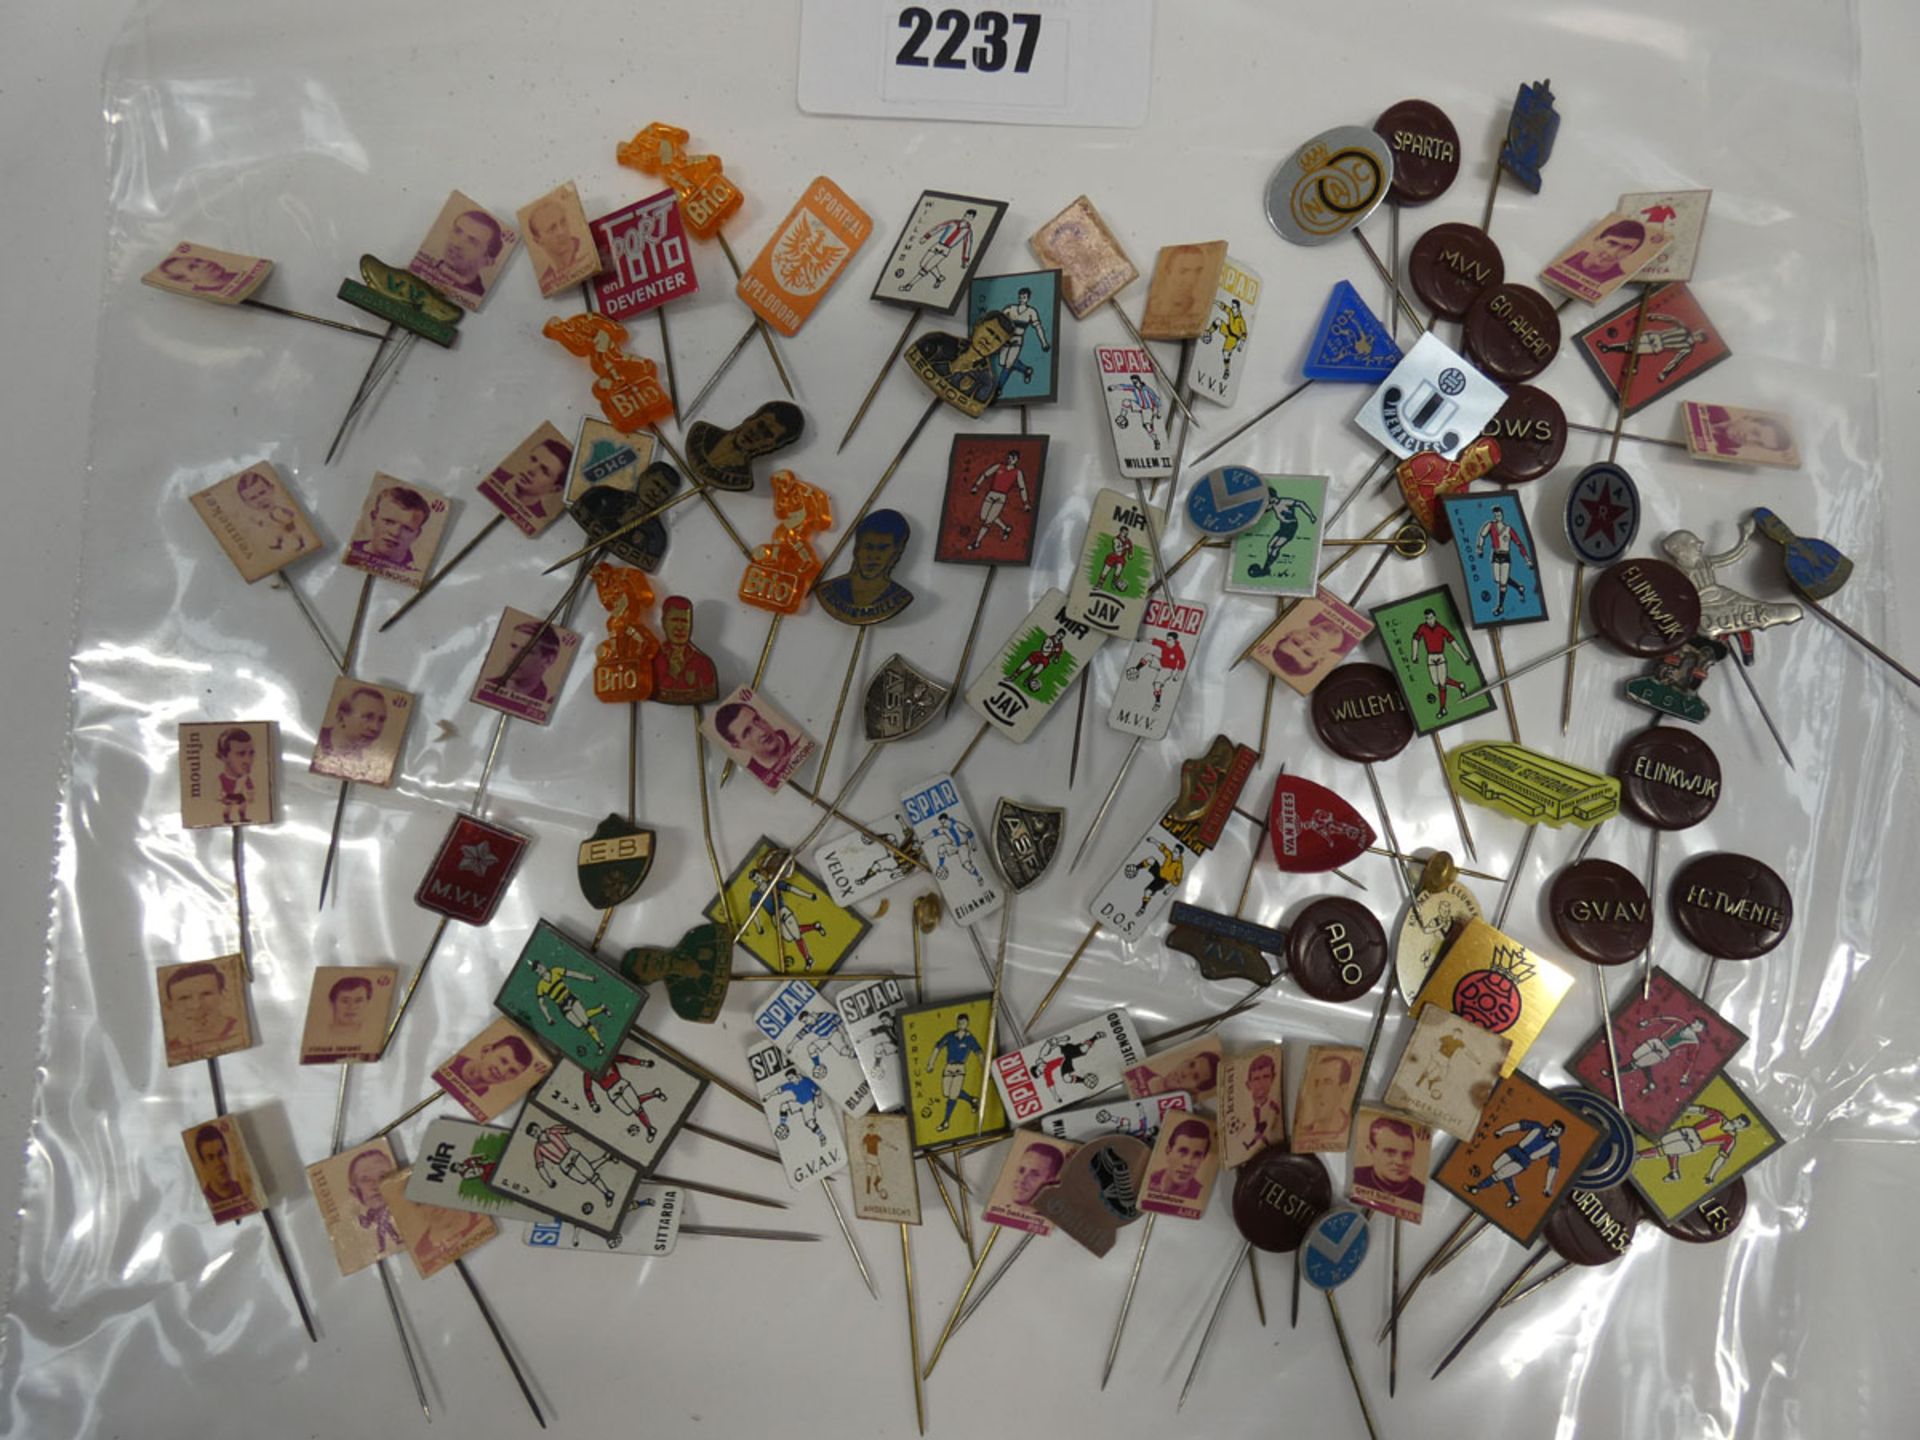 Consignment of mostly European football related lapel pin badges